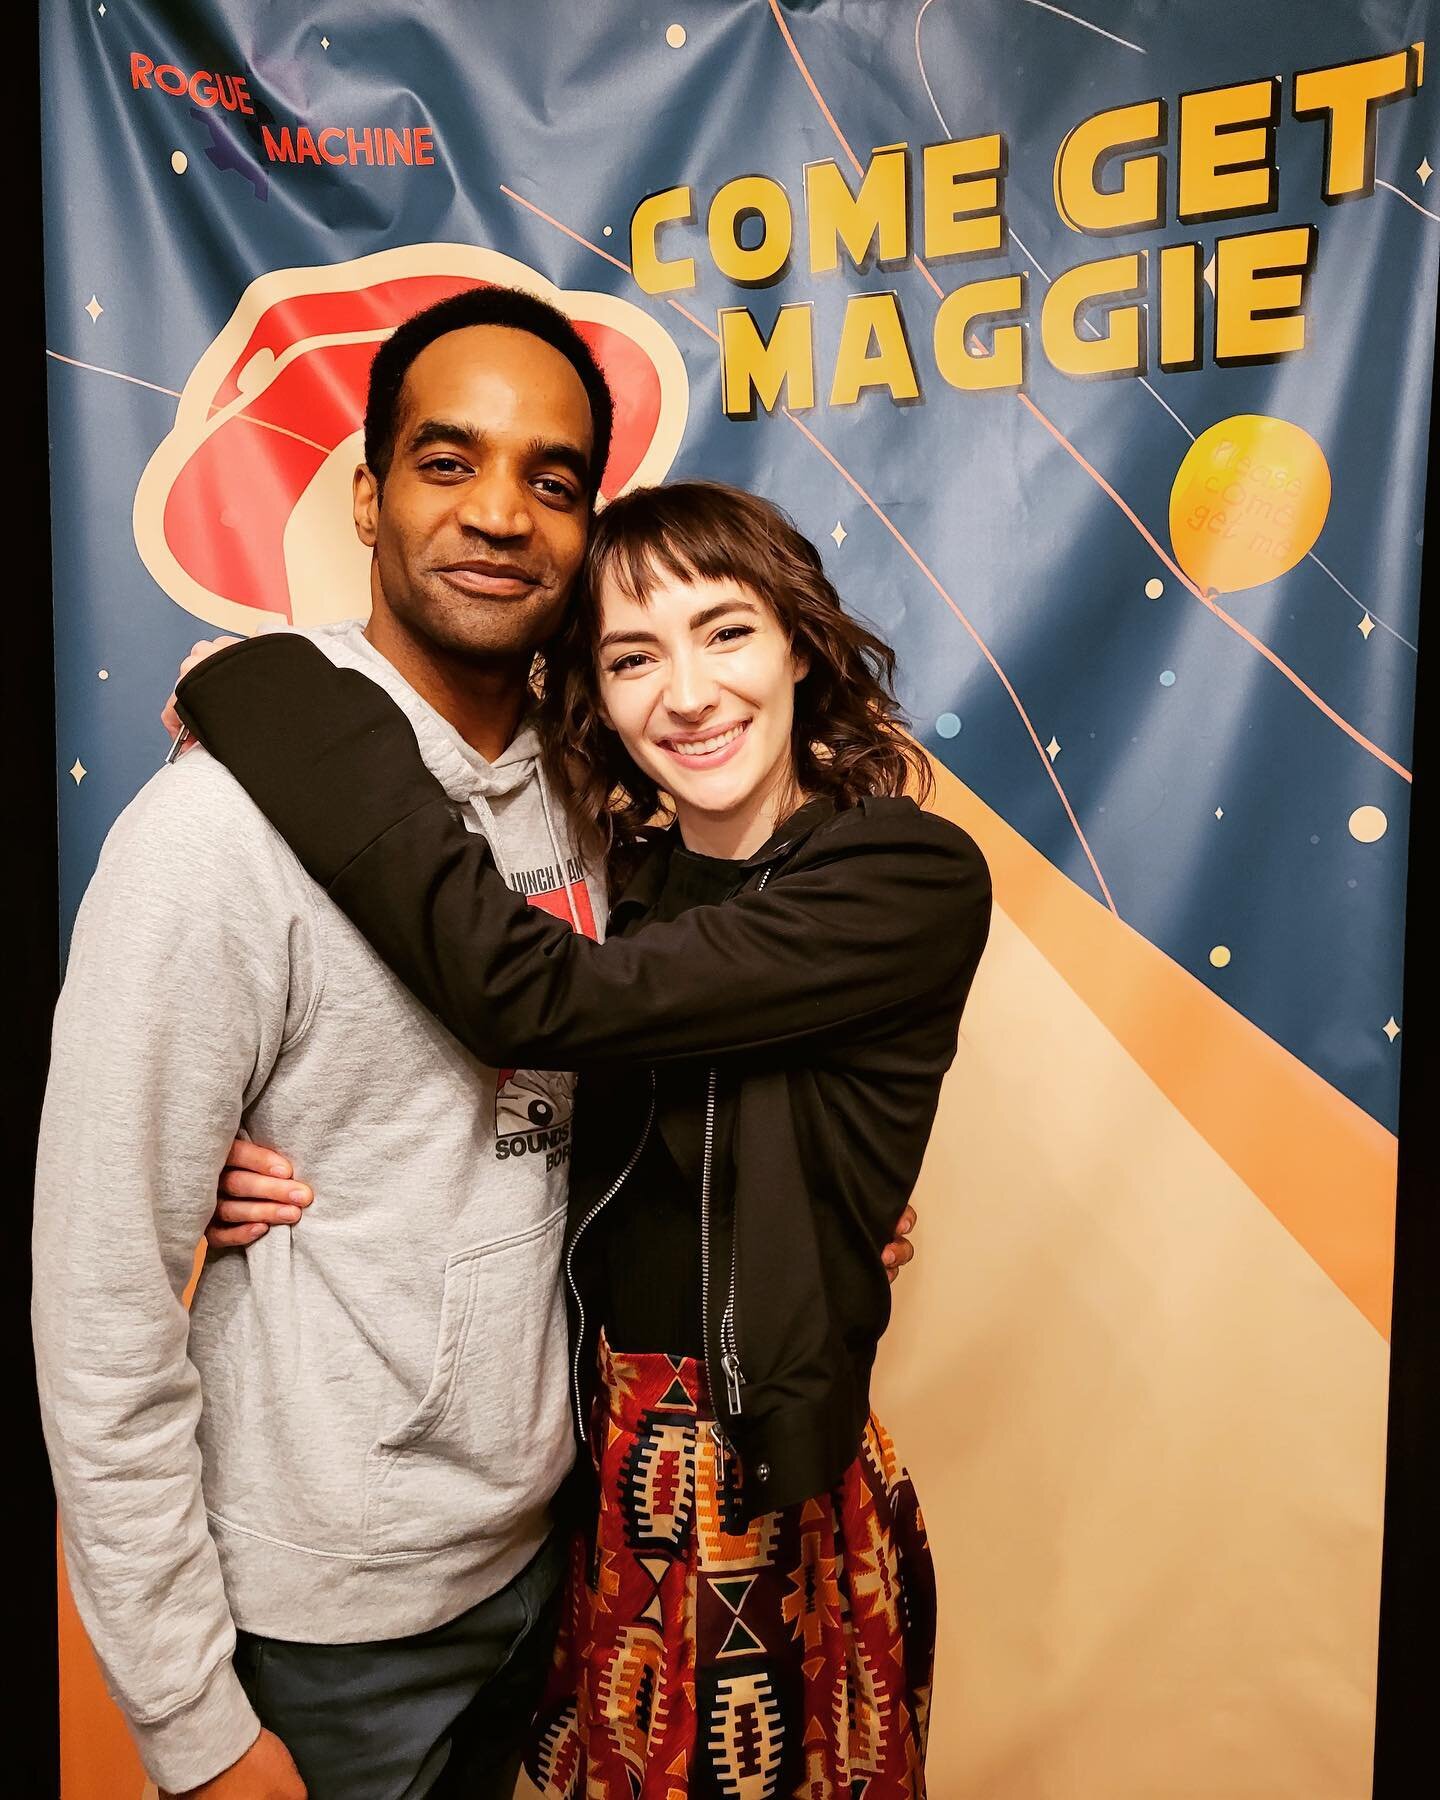 You can see the chemistry and love with this cast and we are beyond thankful to have such immense talent in Come Get Maggie!

Get your tix now at RogueMachine.Ludus.com 🛸👽🚀

#ComeGetMaggie #ComeGetMaggieMusical #musicaltheatre #musical #theatre